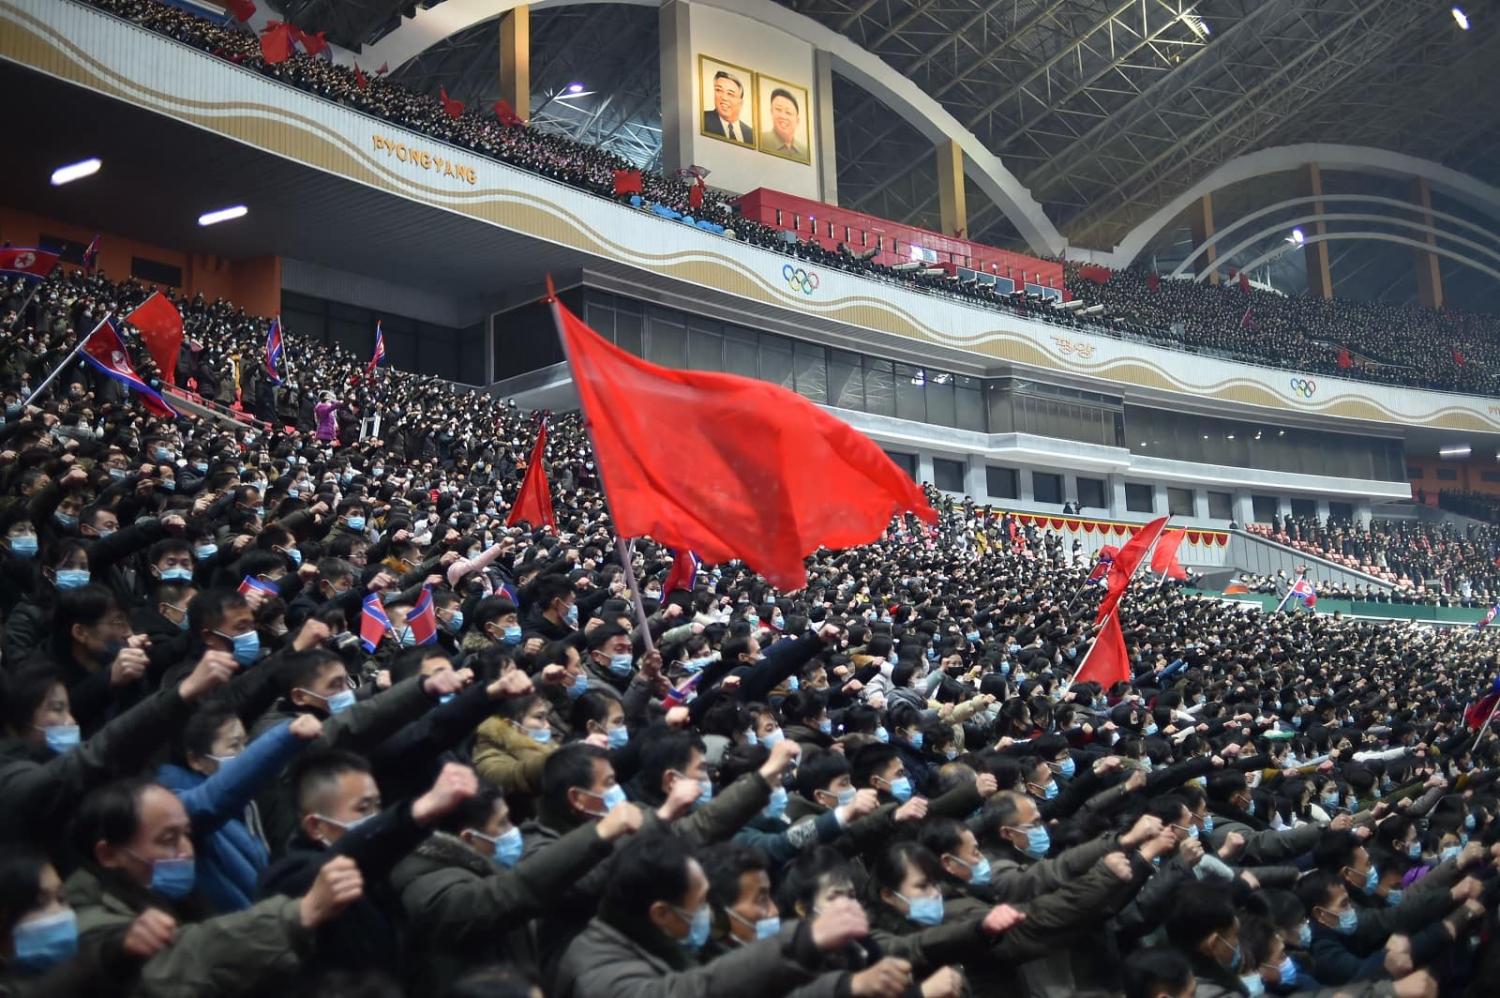 North Koreans attend a rally to endorse the decisions of the 6th Plenary Meeting of the 8th Central Committee of the Workers’ Party of Korea, Pyongyang, 5 January 2023 (Kim Won Jin/AFP via Getty Images)